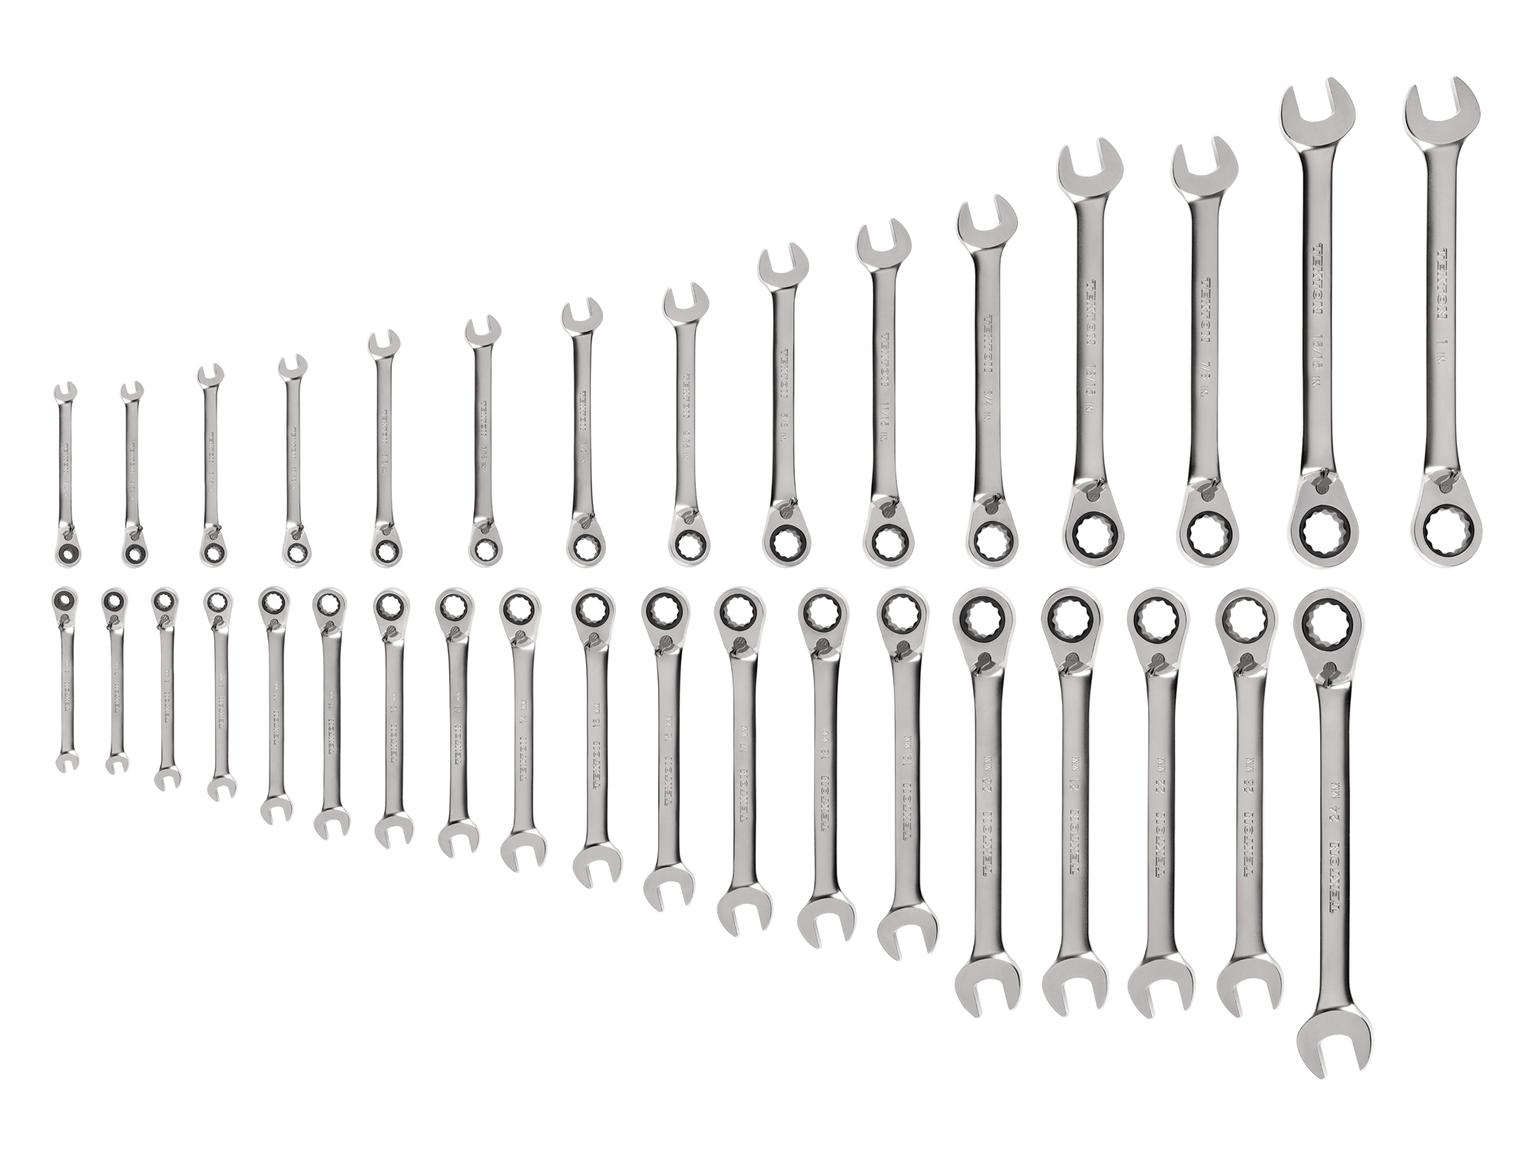 TEKTON WRC94005-T Reversible 12-Point Ratcheting Combination Wrench Set, 34-Piece (1/4-1 in., 6-24 mm)